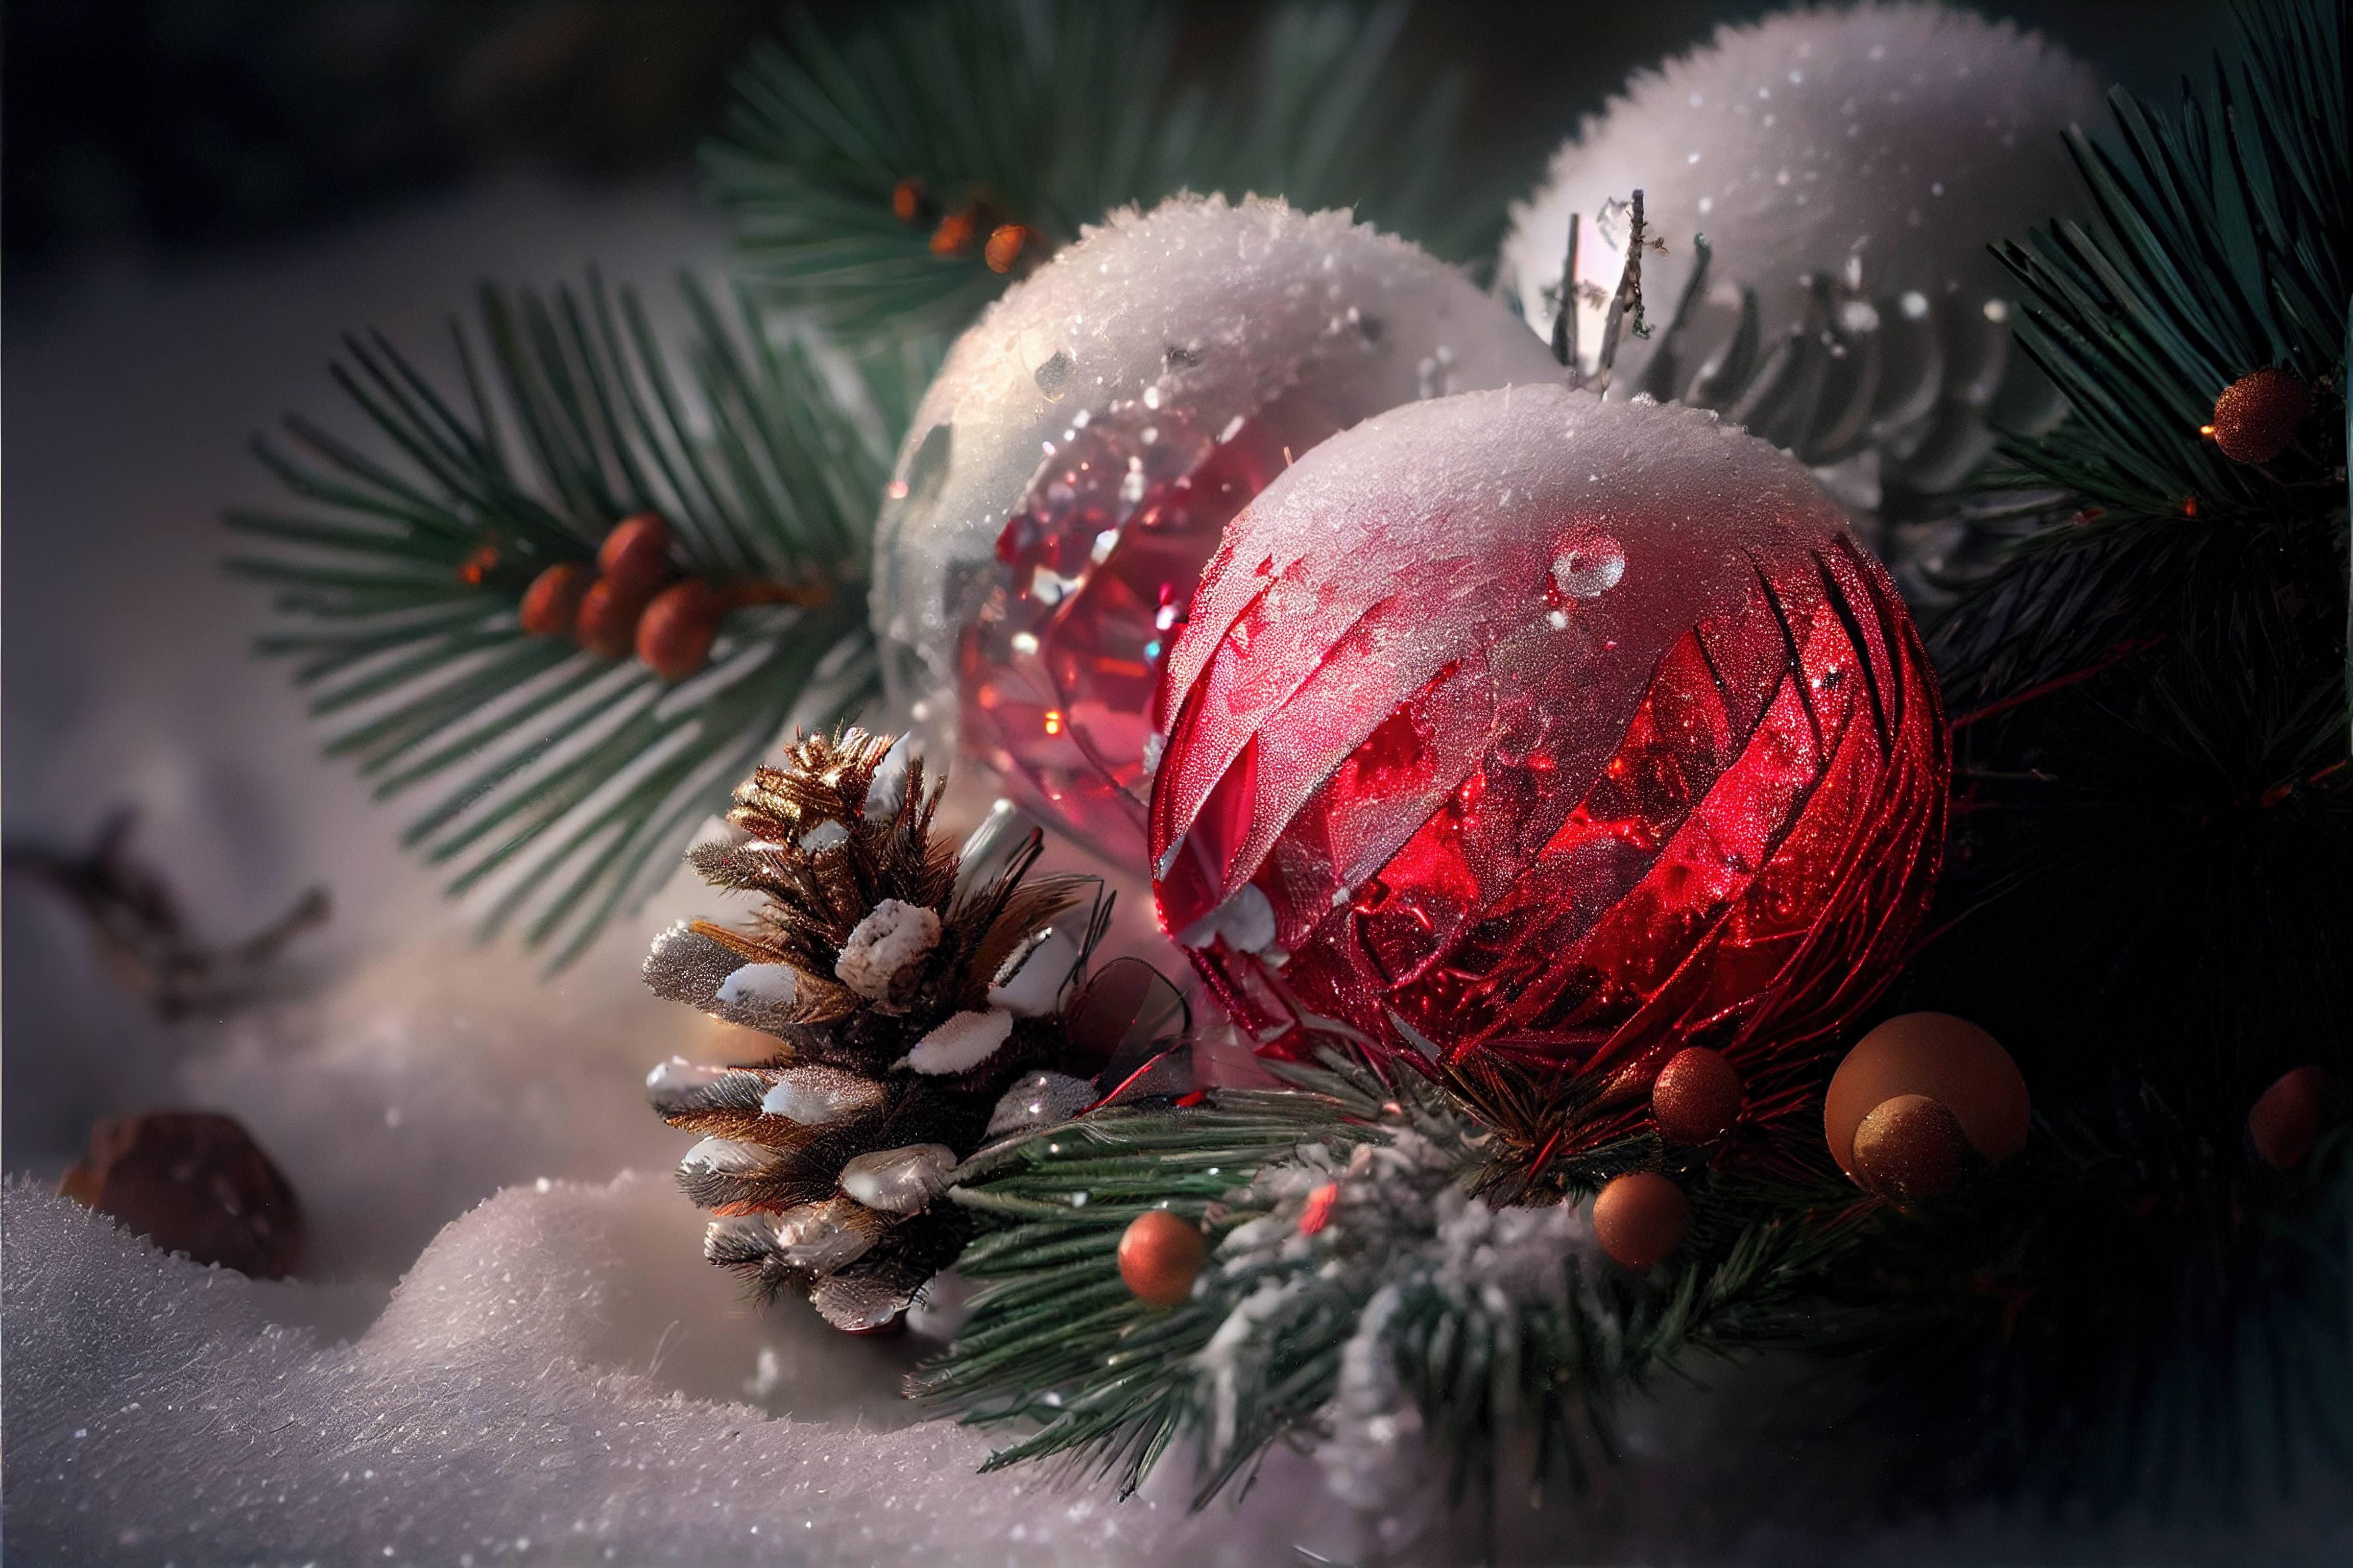 Christmas Background Holiday wallpaper